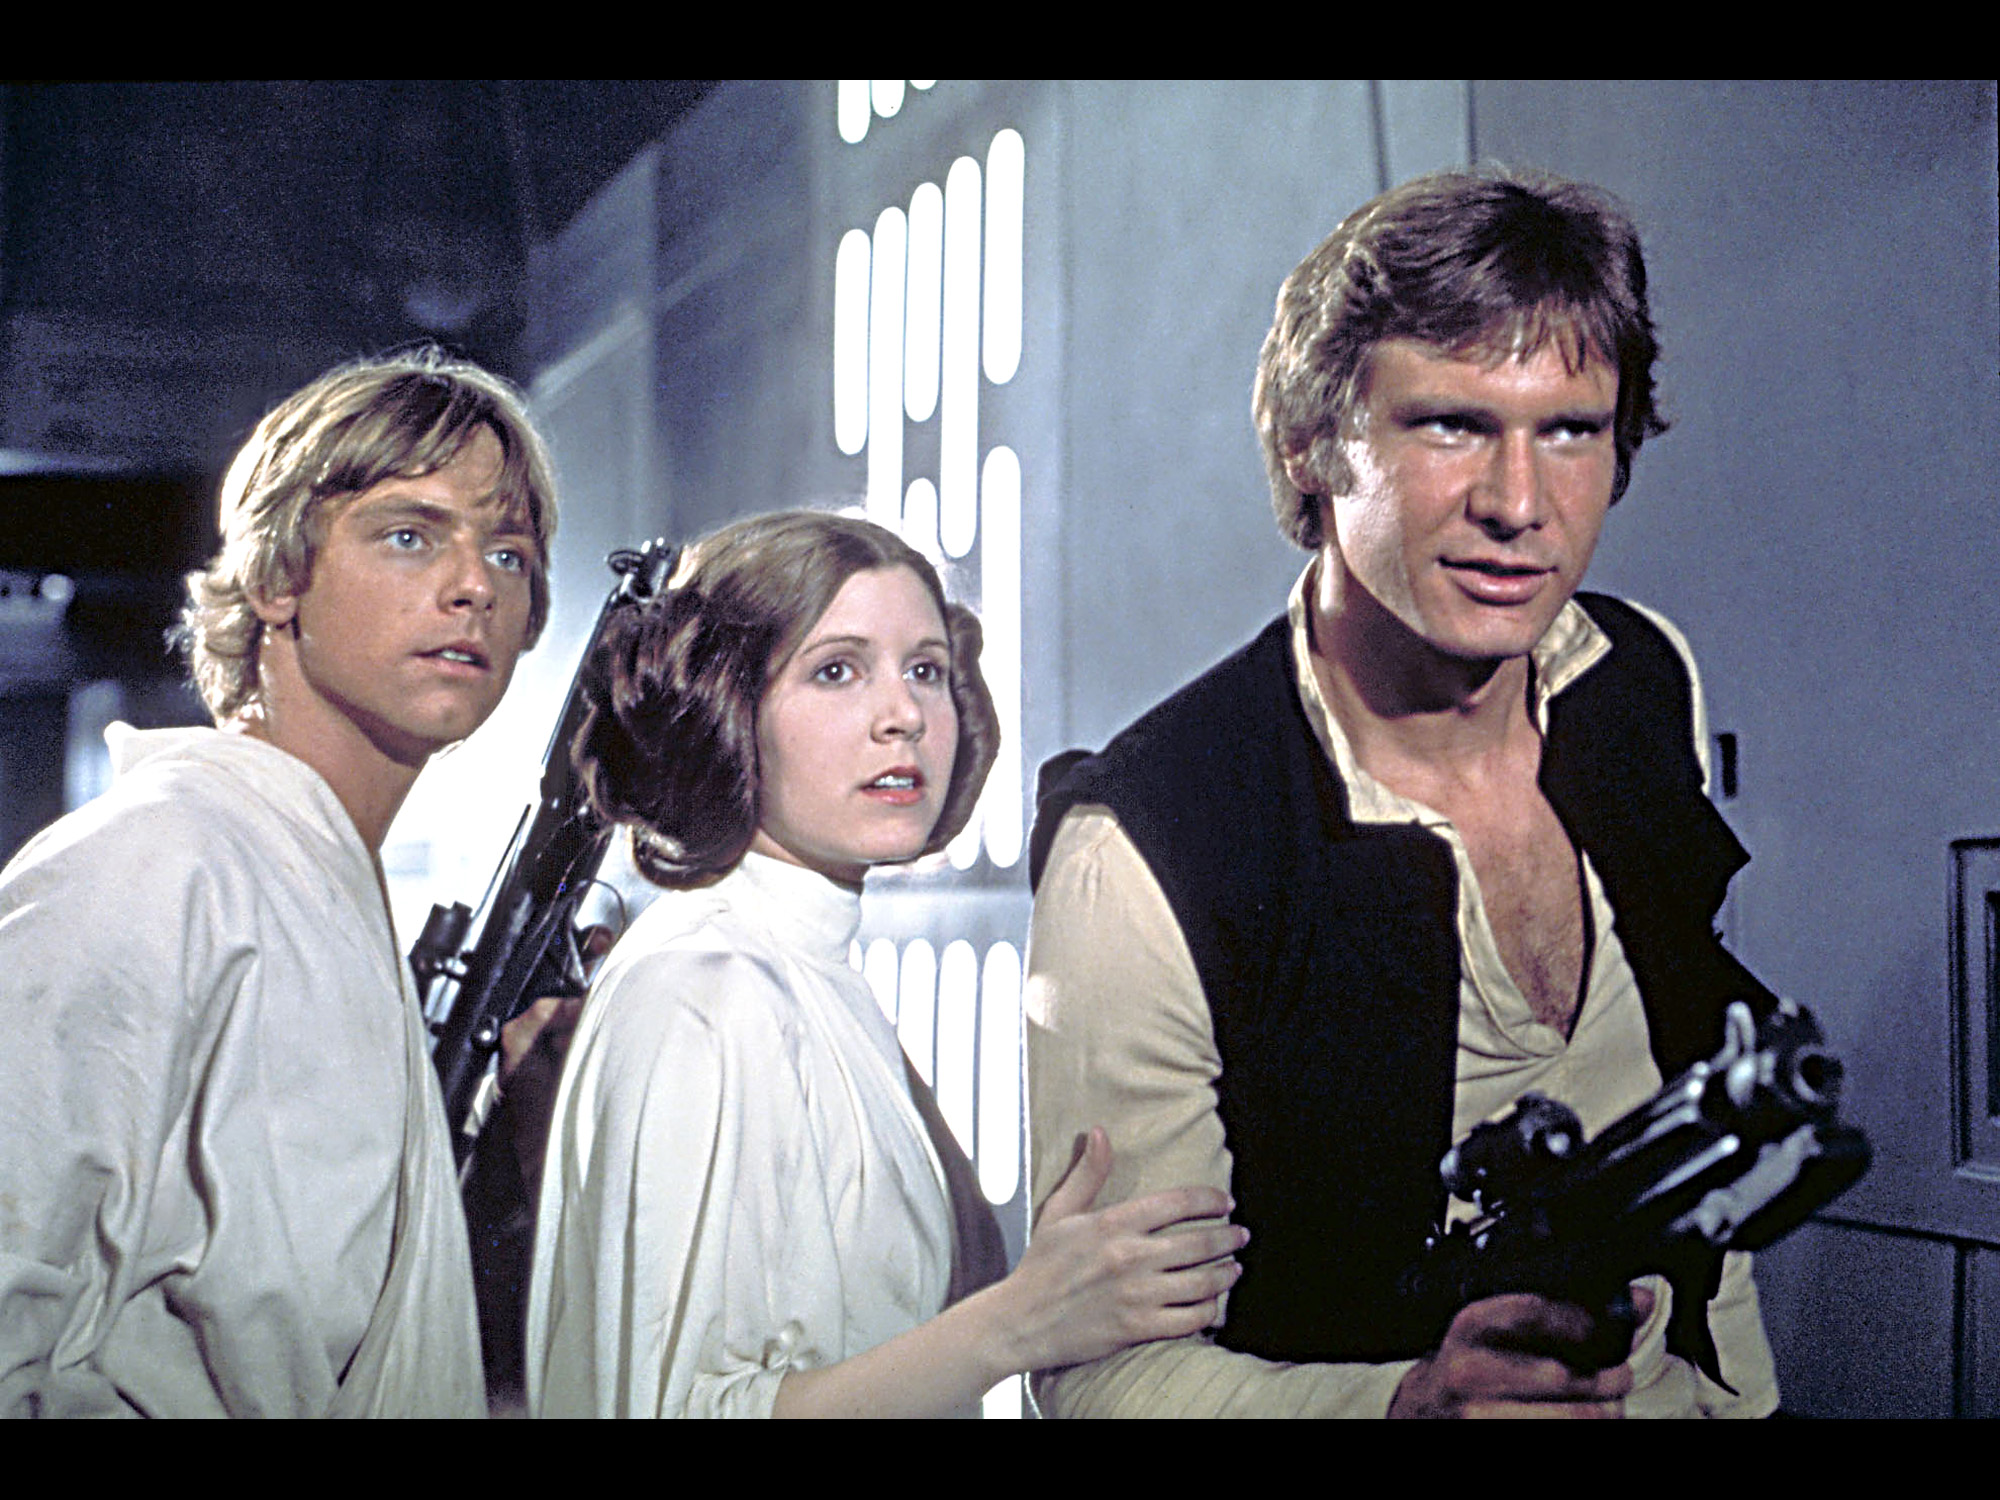 Scene from "Star Wars: Episode IV - A New Hope" (Photo credit by Lucasfilm LTD.)